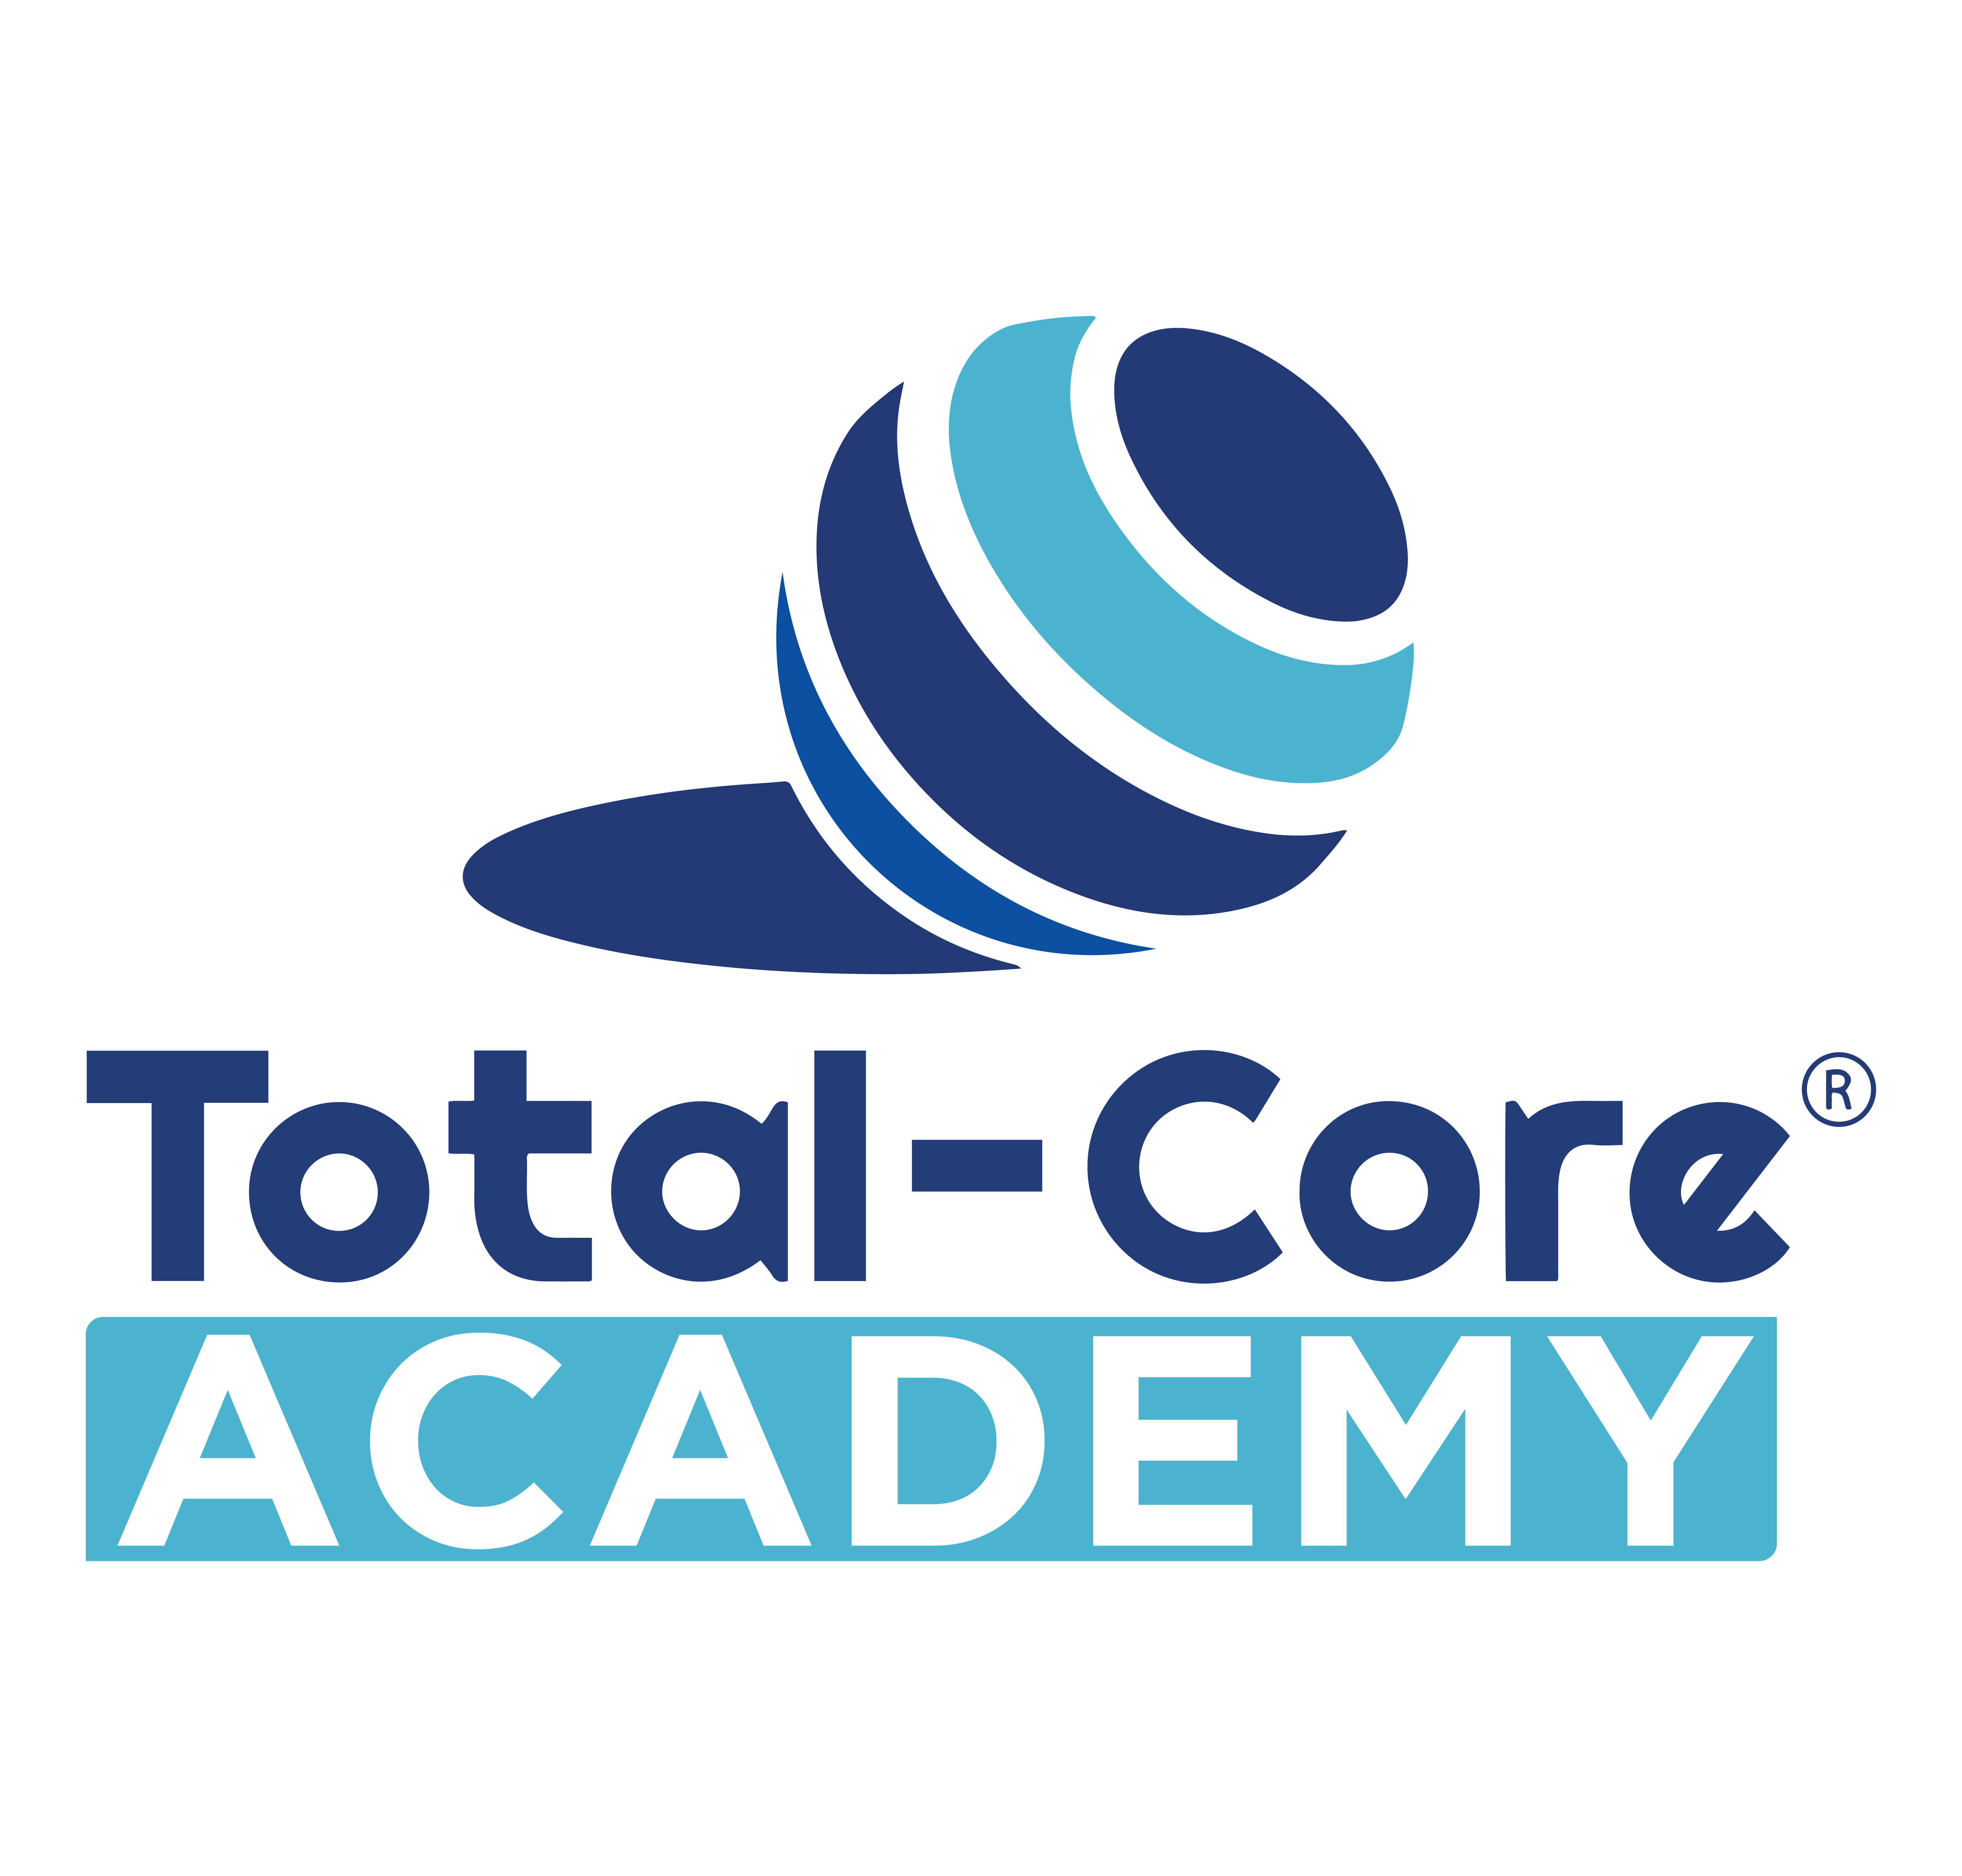 Total core-Academy-logo-01(1).png